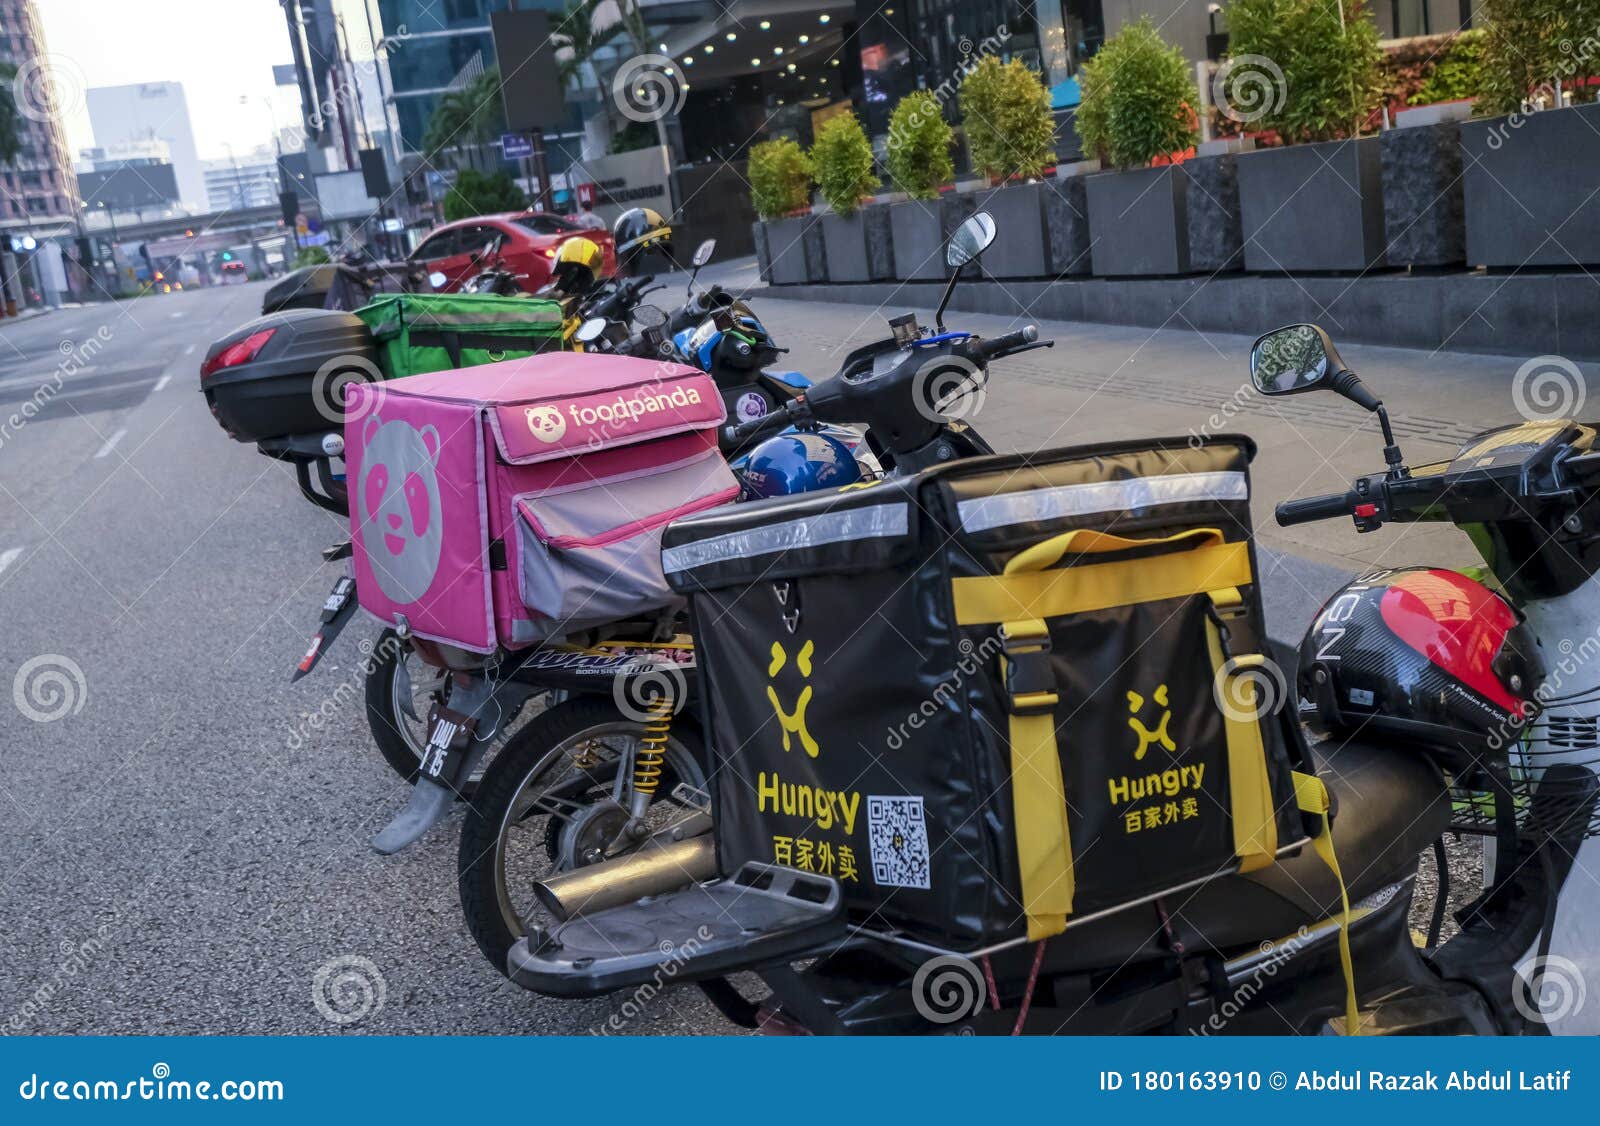 Food Delivery Service Rider Using Motorcycle Editorial Image Image Of Delivery Order 180163910